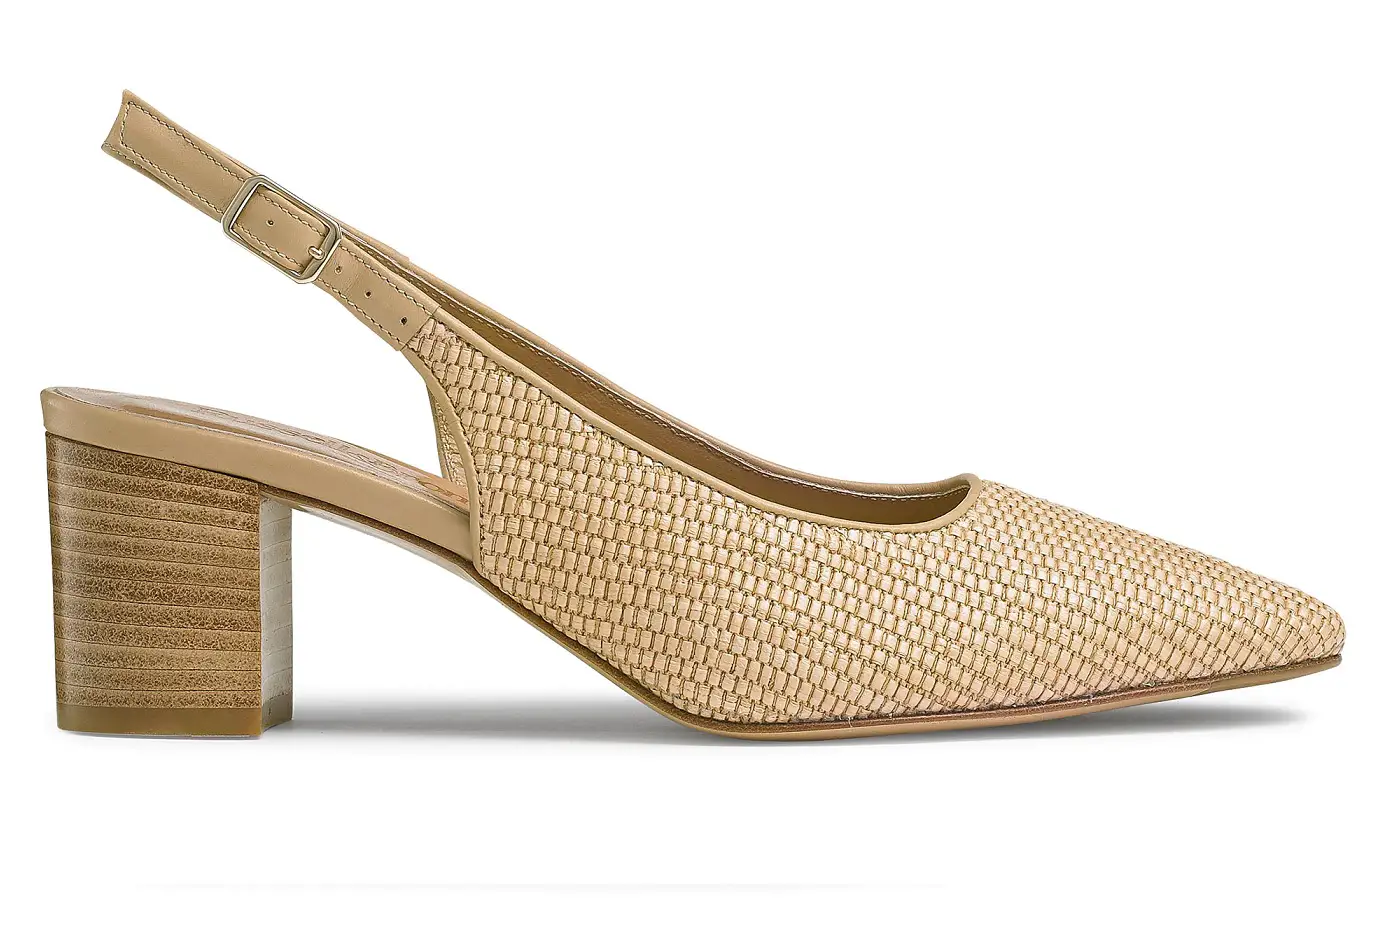 The Duchess of Cambridge wore Russell & Bromley Impulse slingback pumps